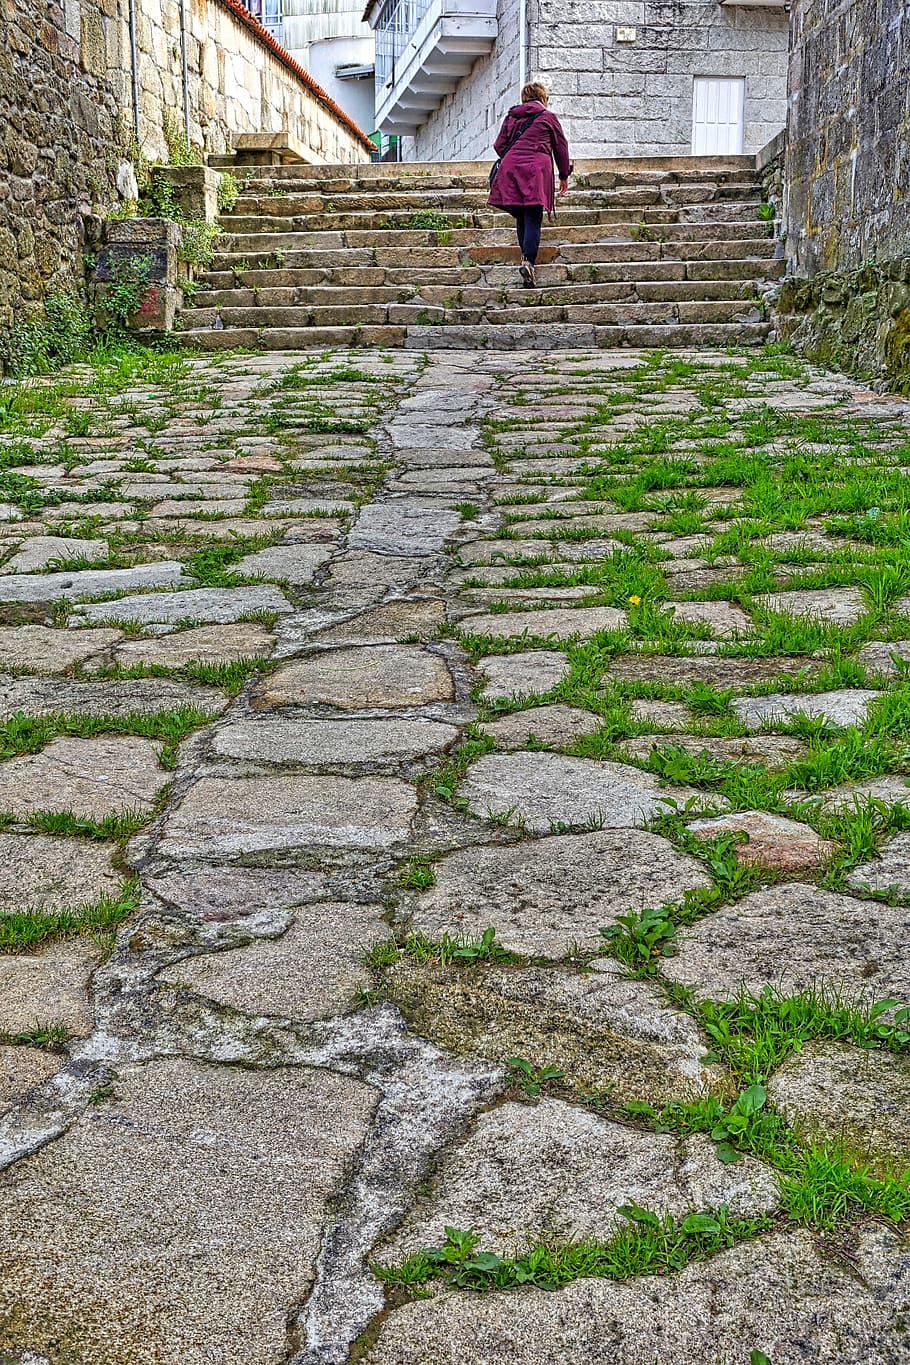 path, grassy, cobblestones, street, pathway, stairs, one person, architecture, real people, women